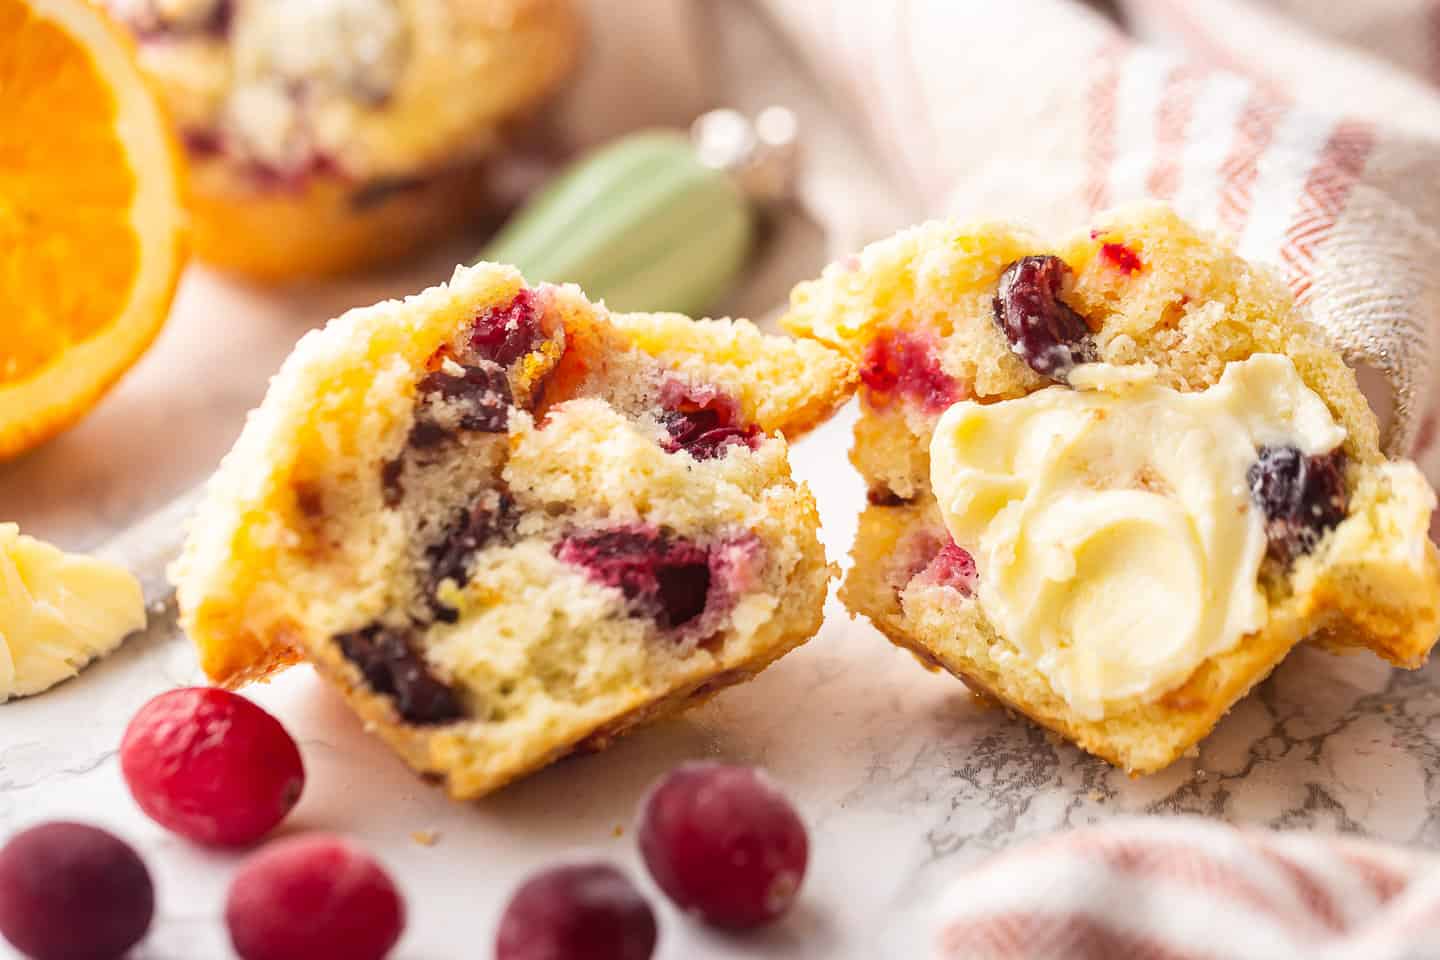 Cranberry orange muffin buttered, with a fresh orange in the background and a red striped kitchen towel.